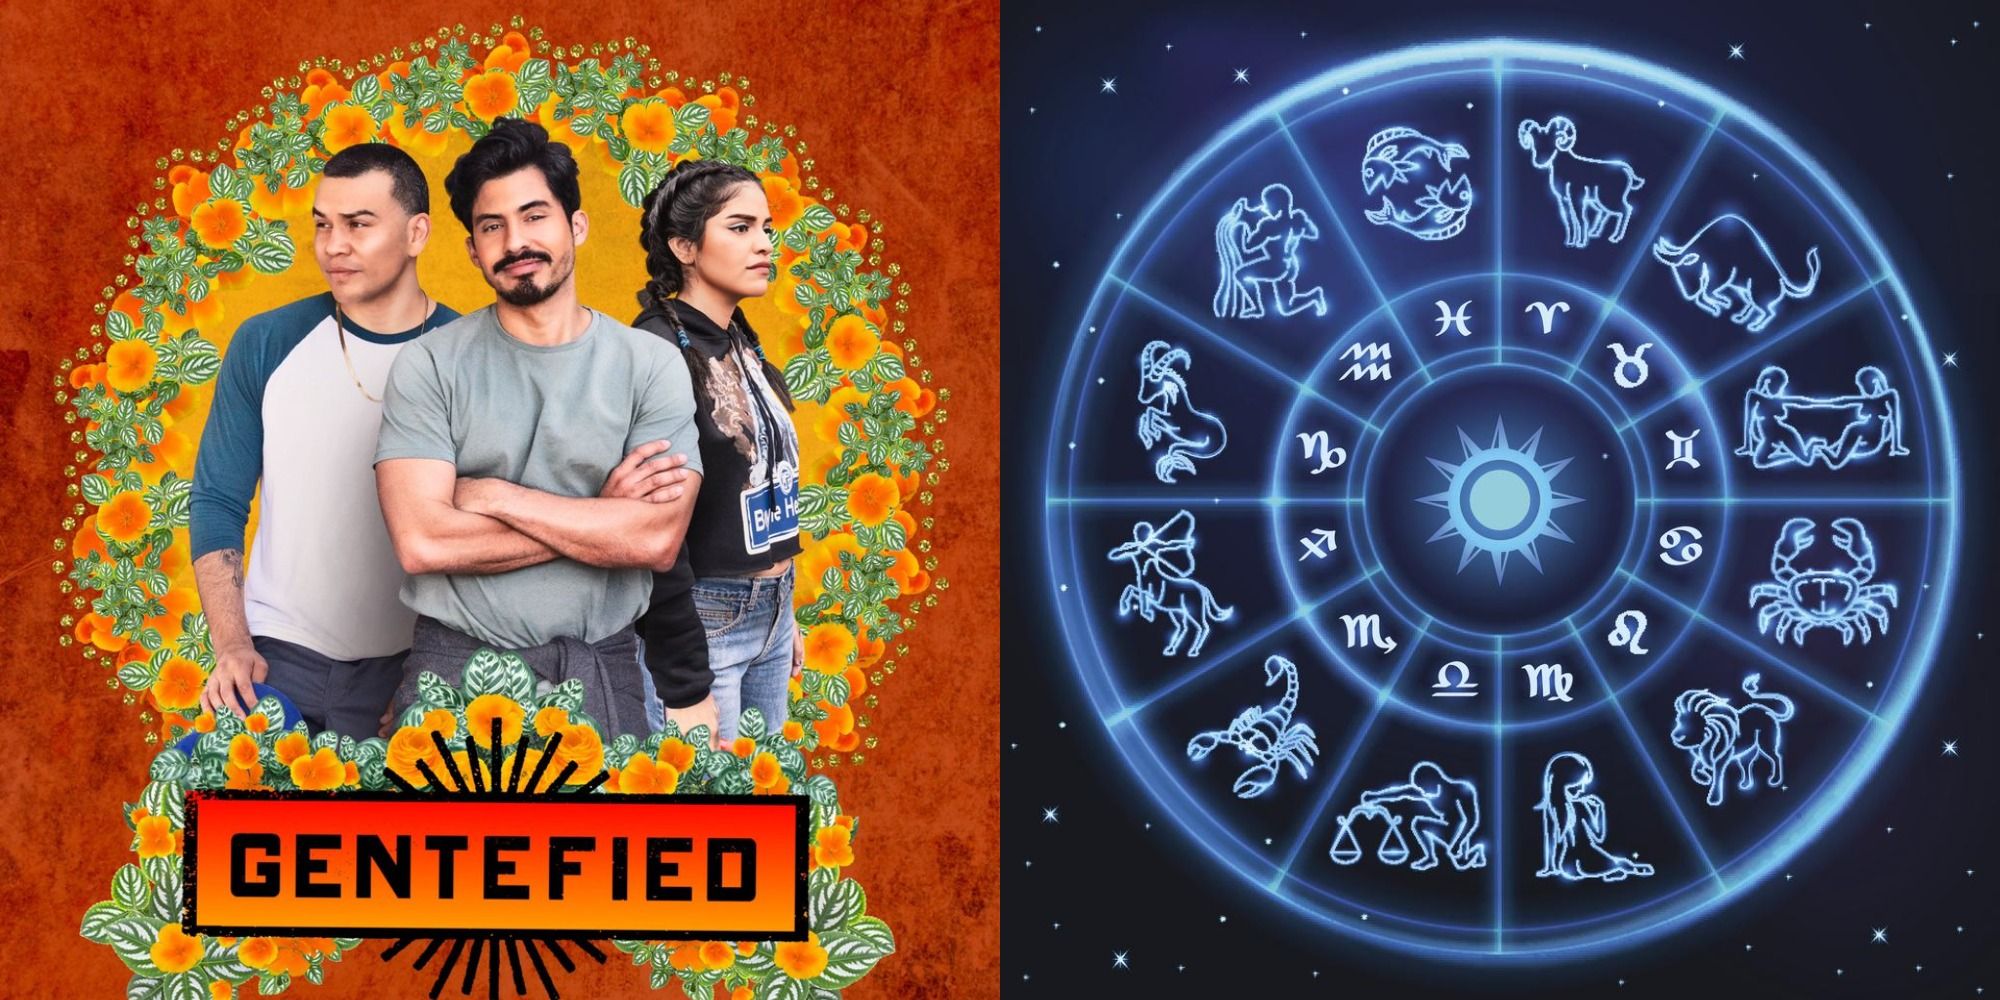 Split image showing the poster for Gentefied and a zodiac wheel